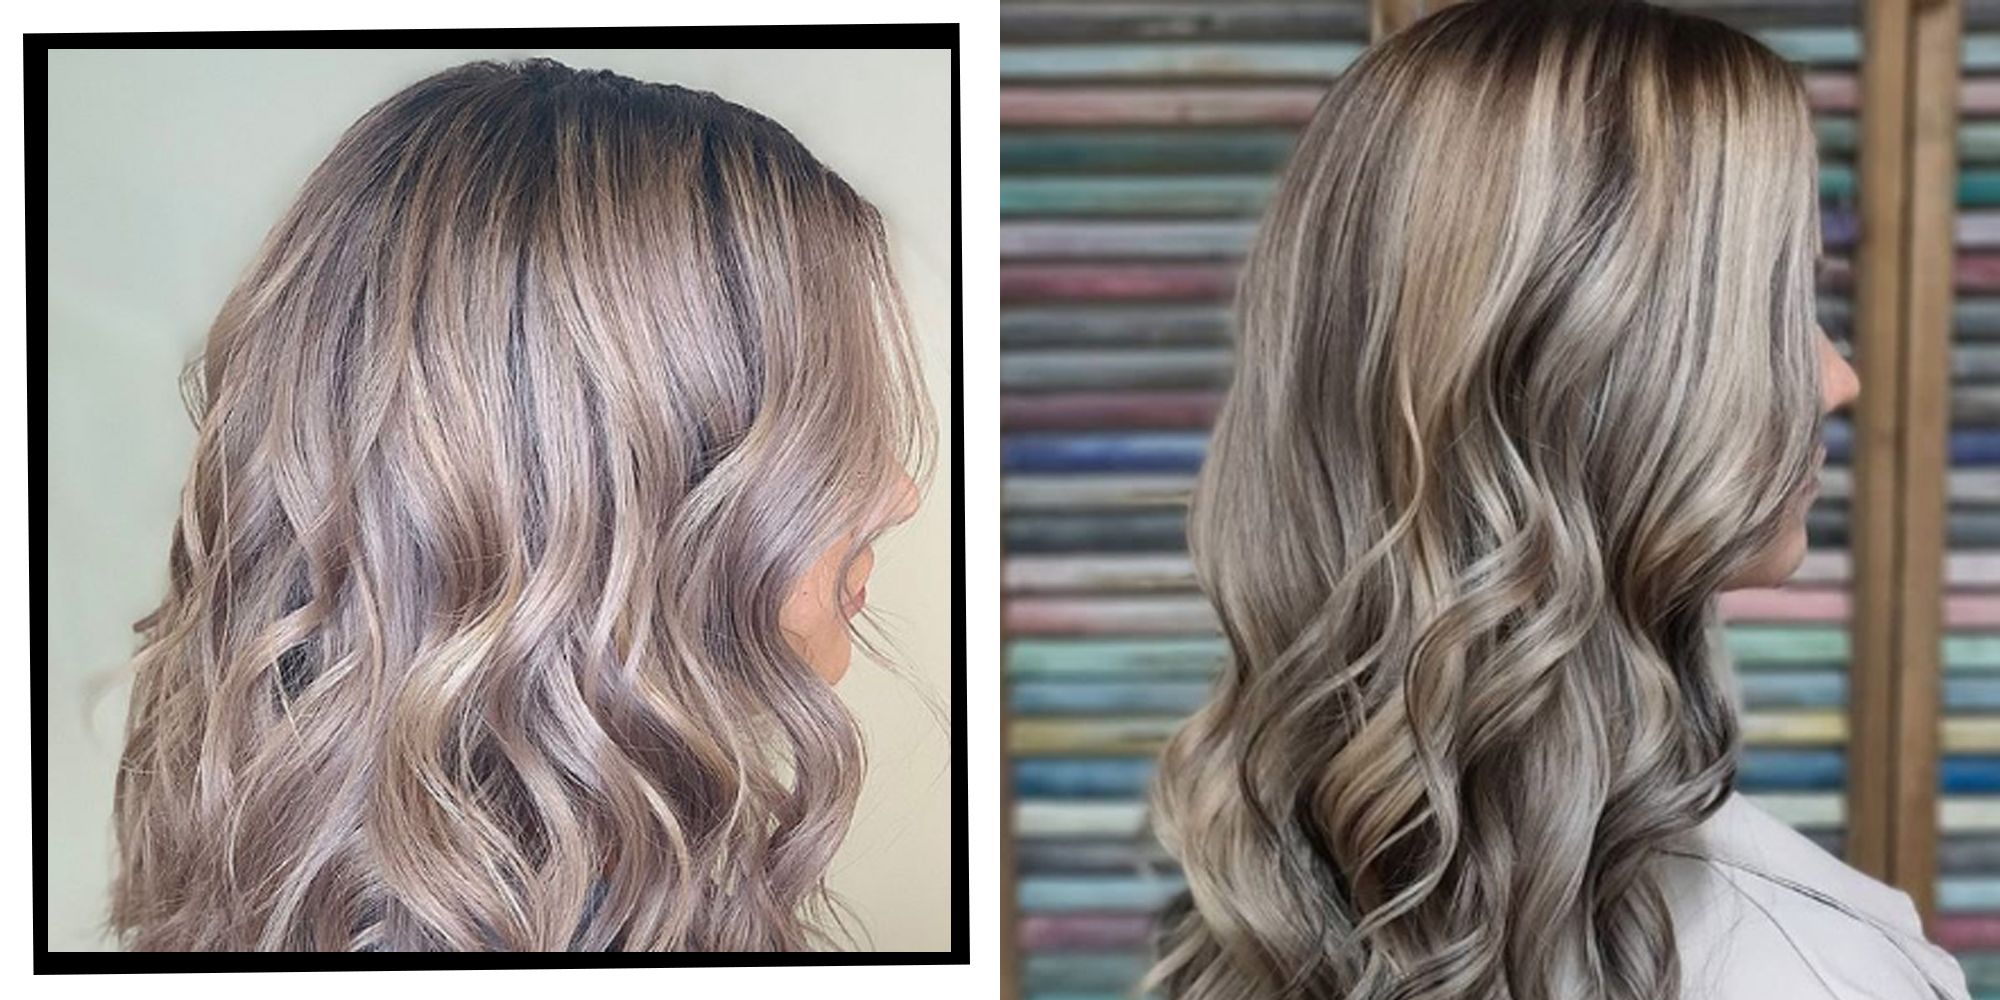 9 Blonde Hair Trends For 2019 New Ways To Try Blonde Hair Colour